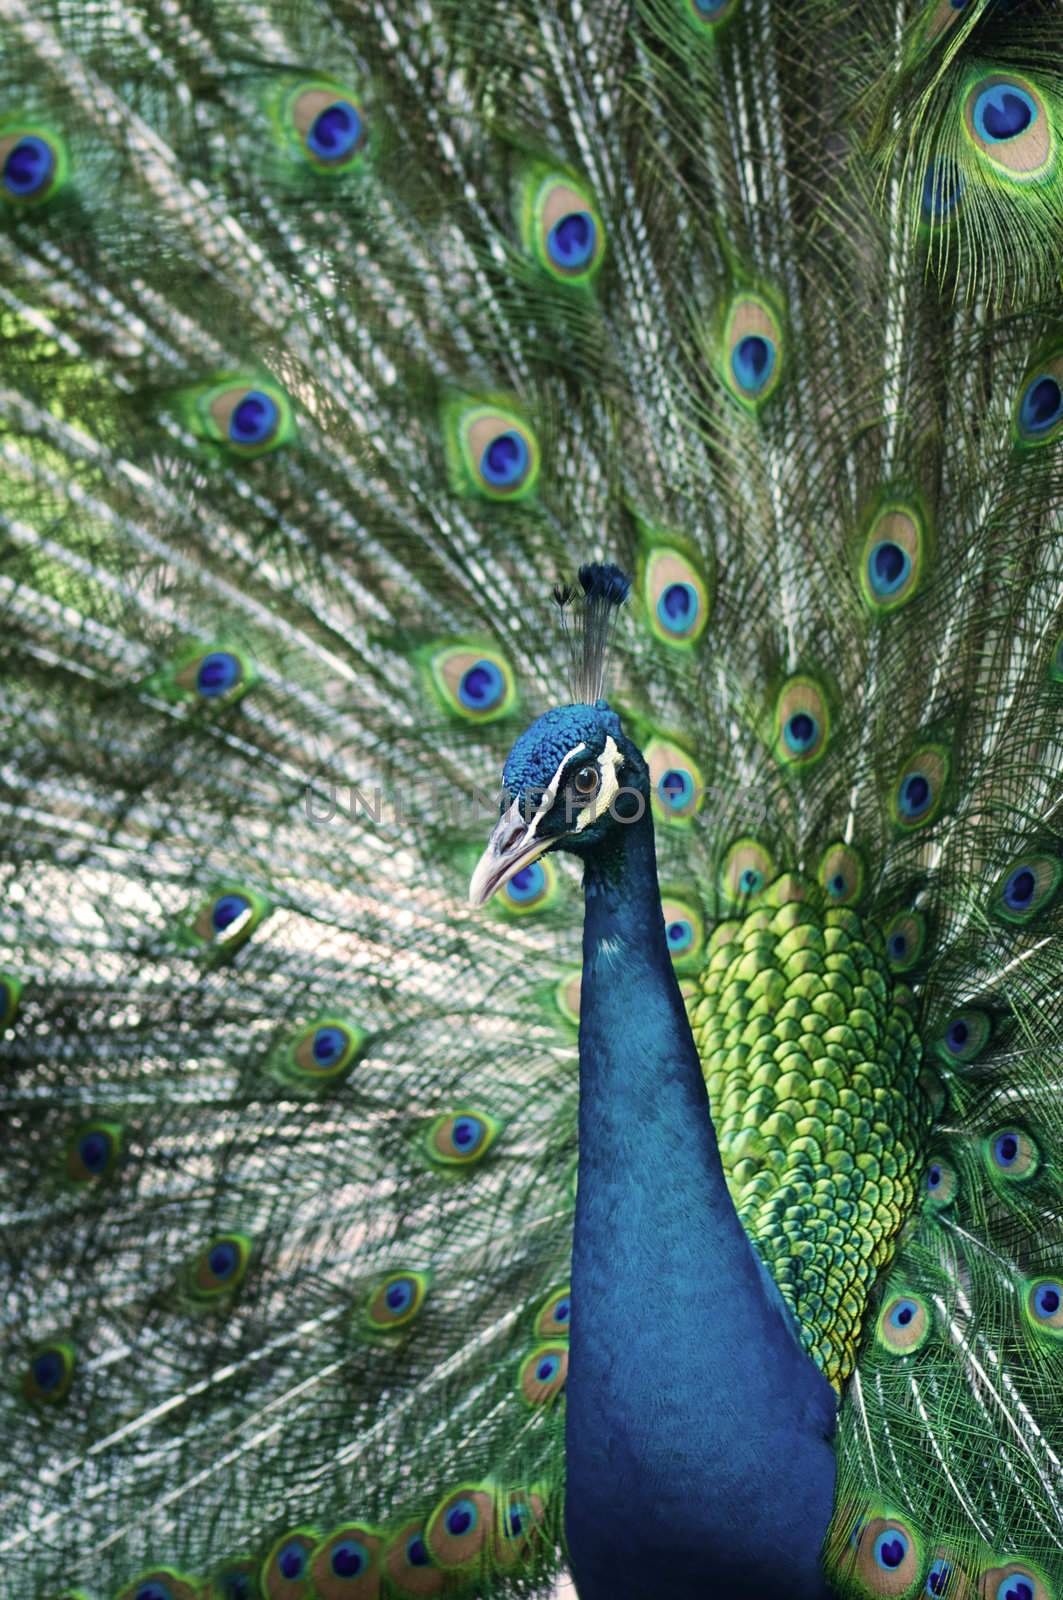 A beautiful peacock portrait with colorful feathers